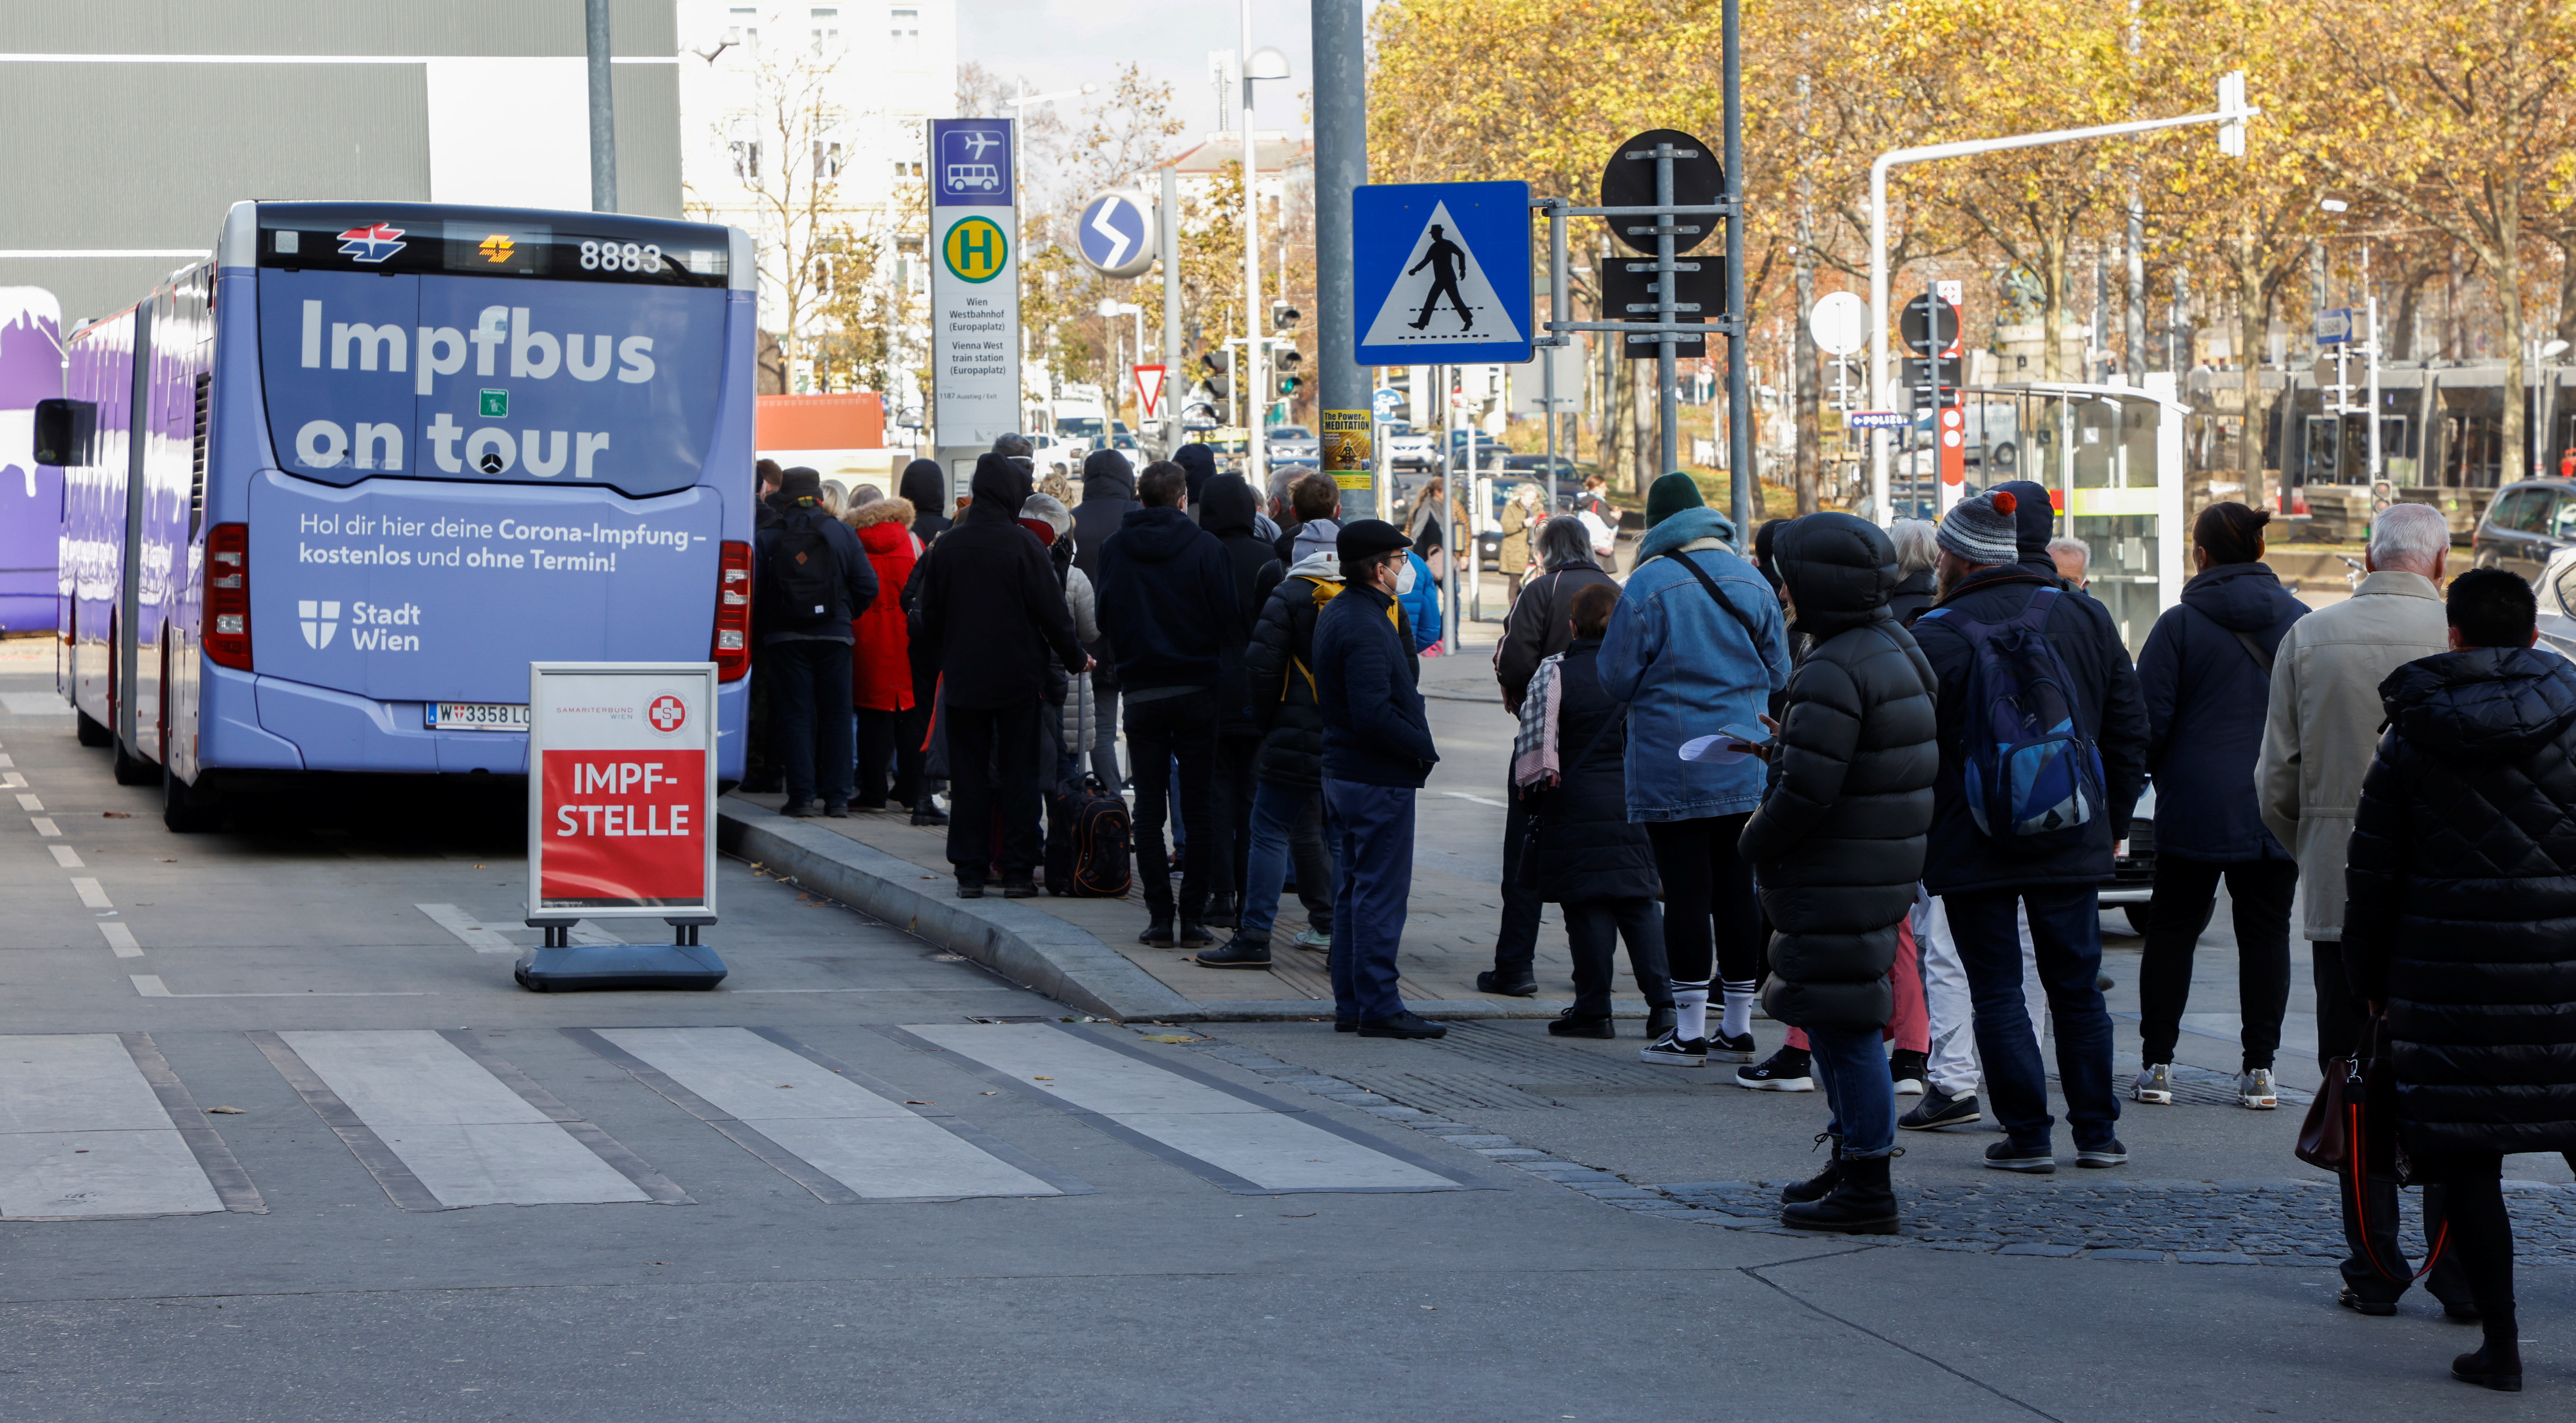 People wait in front of a vaccination bus during the coronavirus disease (COVID-19) outbreak, as Austria's government has imposed a lockdown on people who are not fully vaccinated, in Vienna, Austria, November 18, 2021. REUTERS/Leonhard Foeger